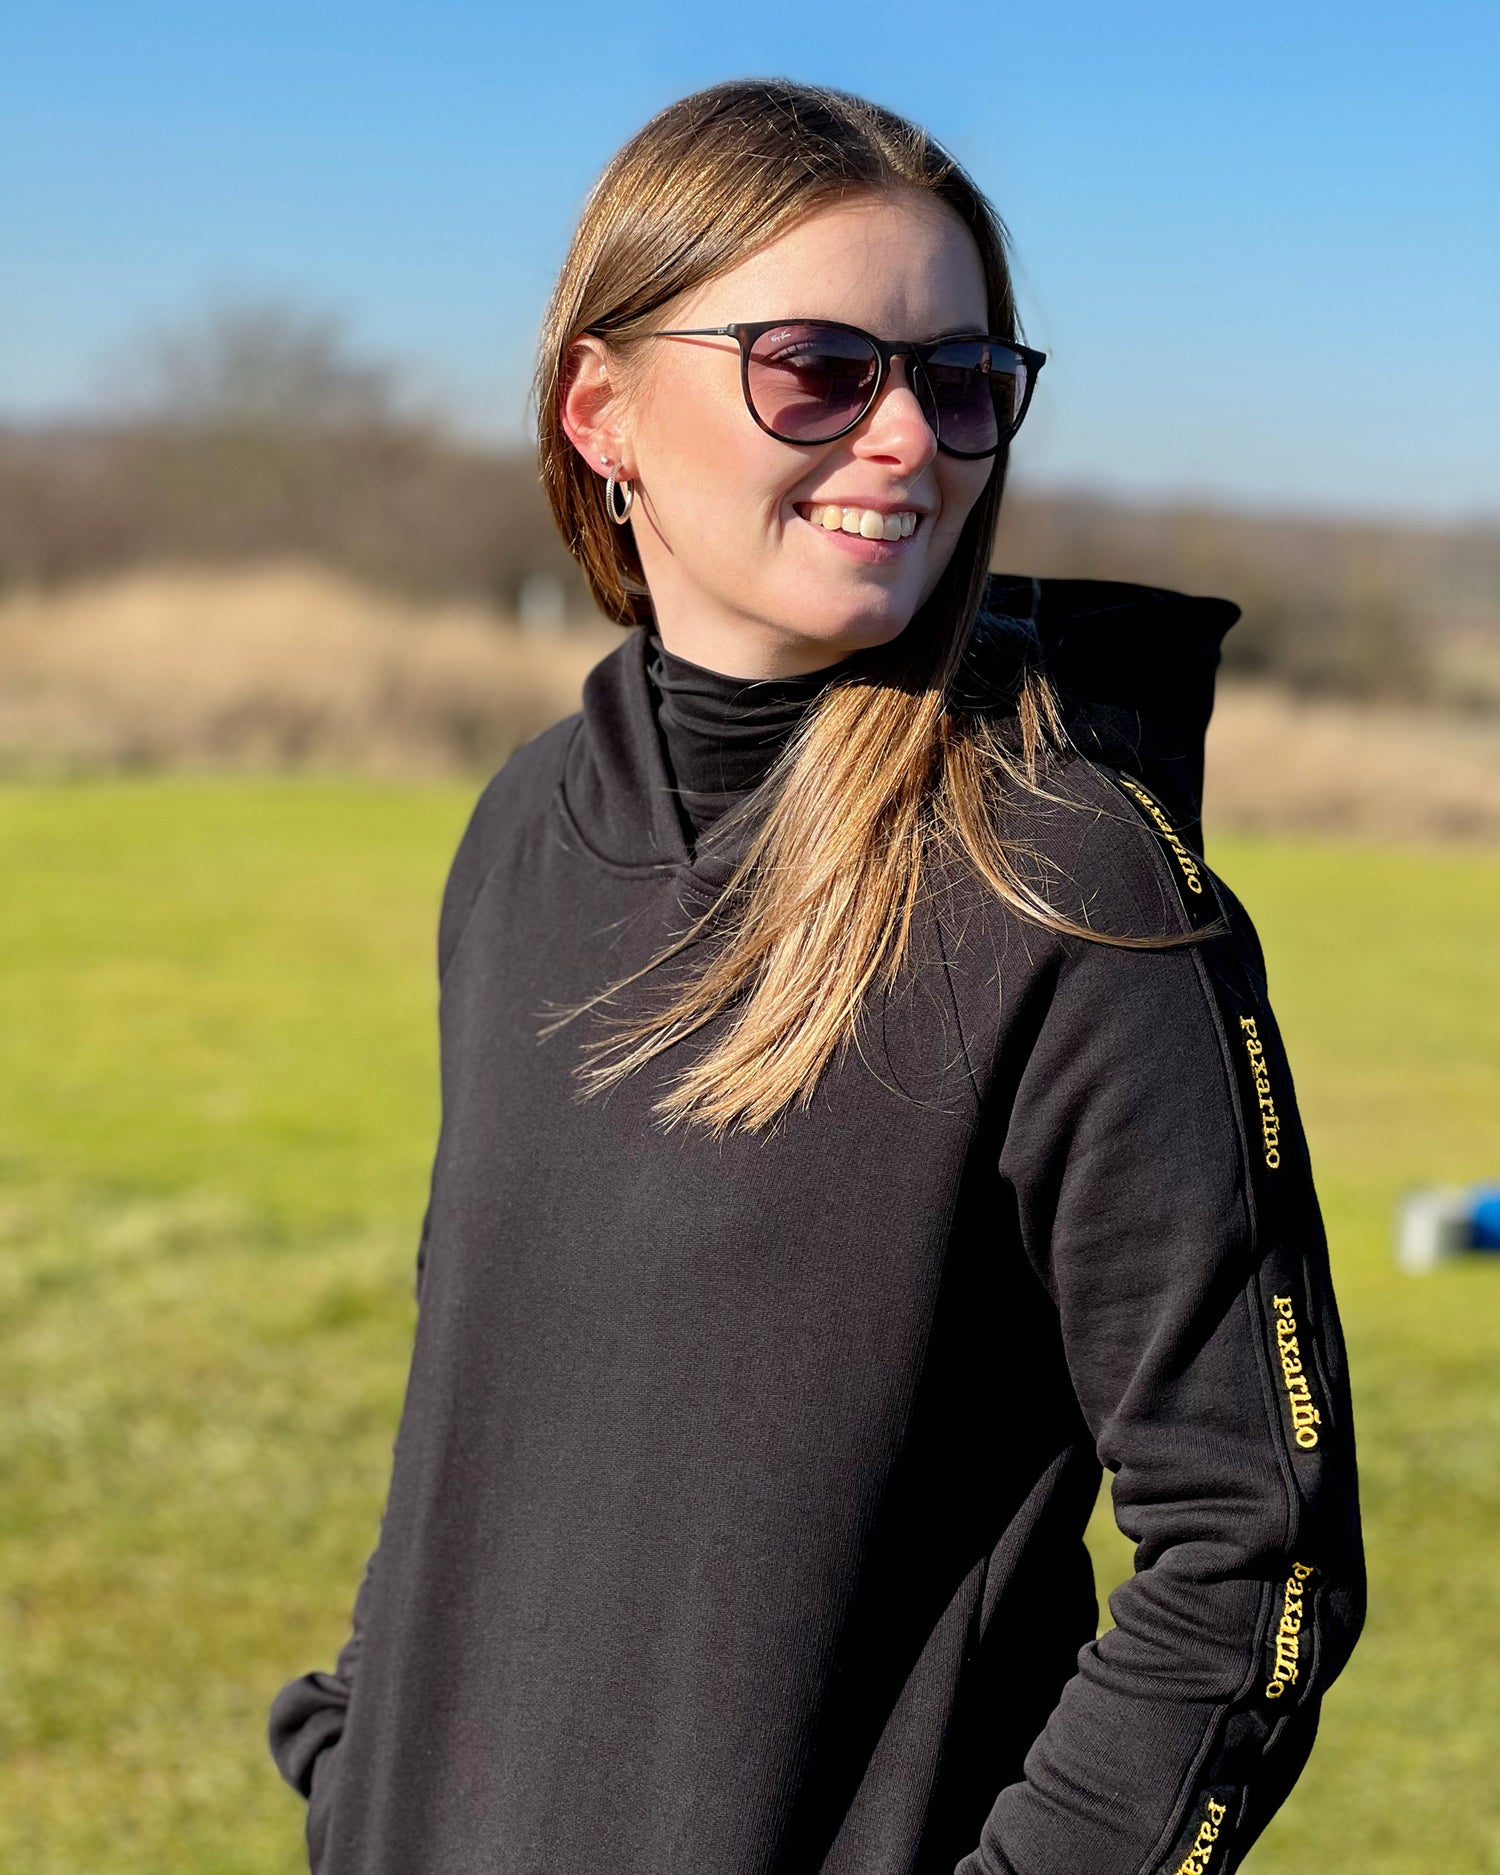 A girl wearing the Organic Golf Hoodie from paxariño on the golf course